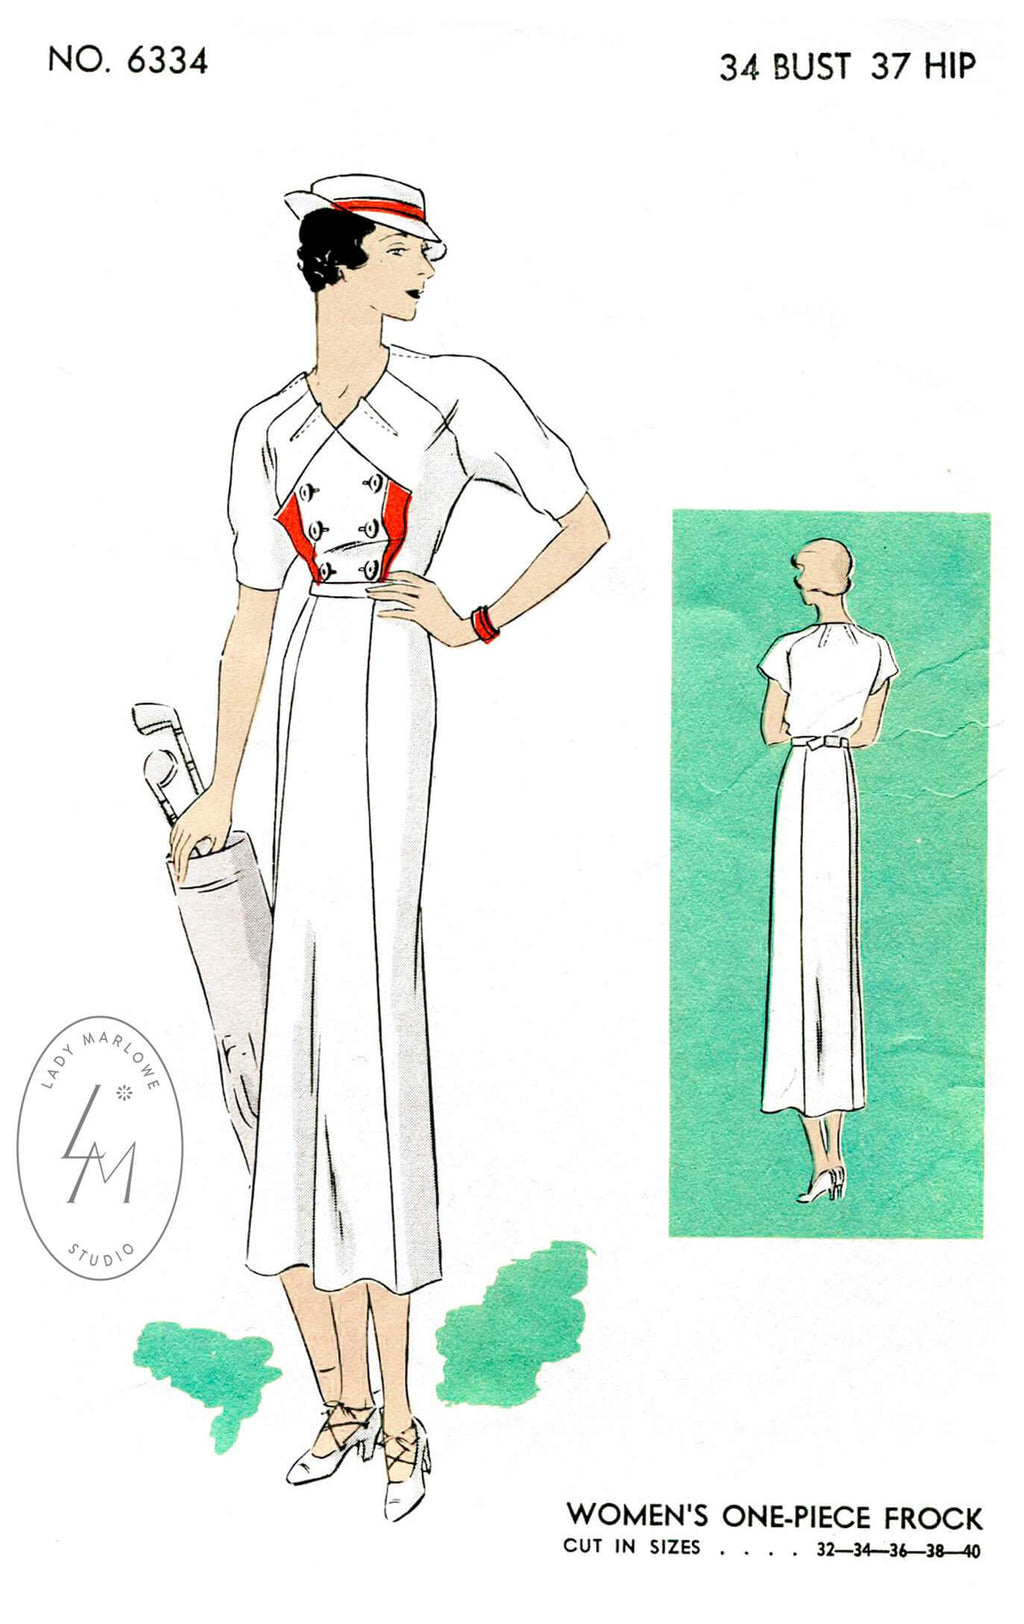 Vogue 6334 1930s sports dress vintage sewing pattern reproduction